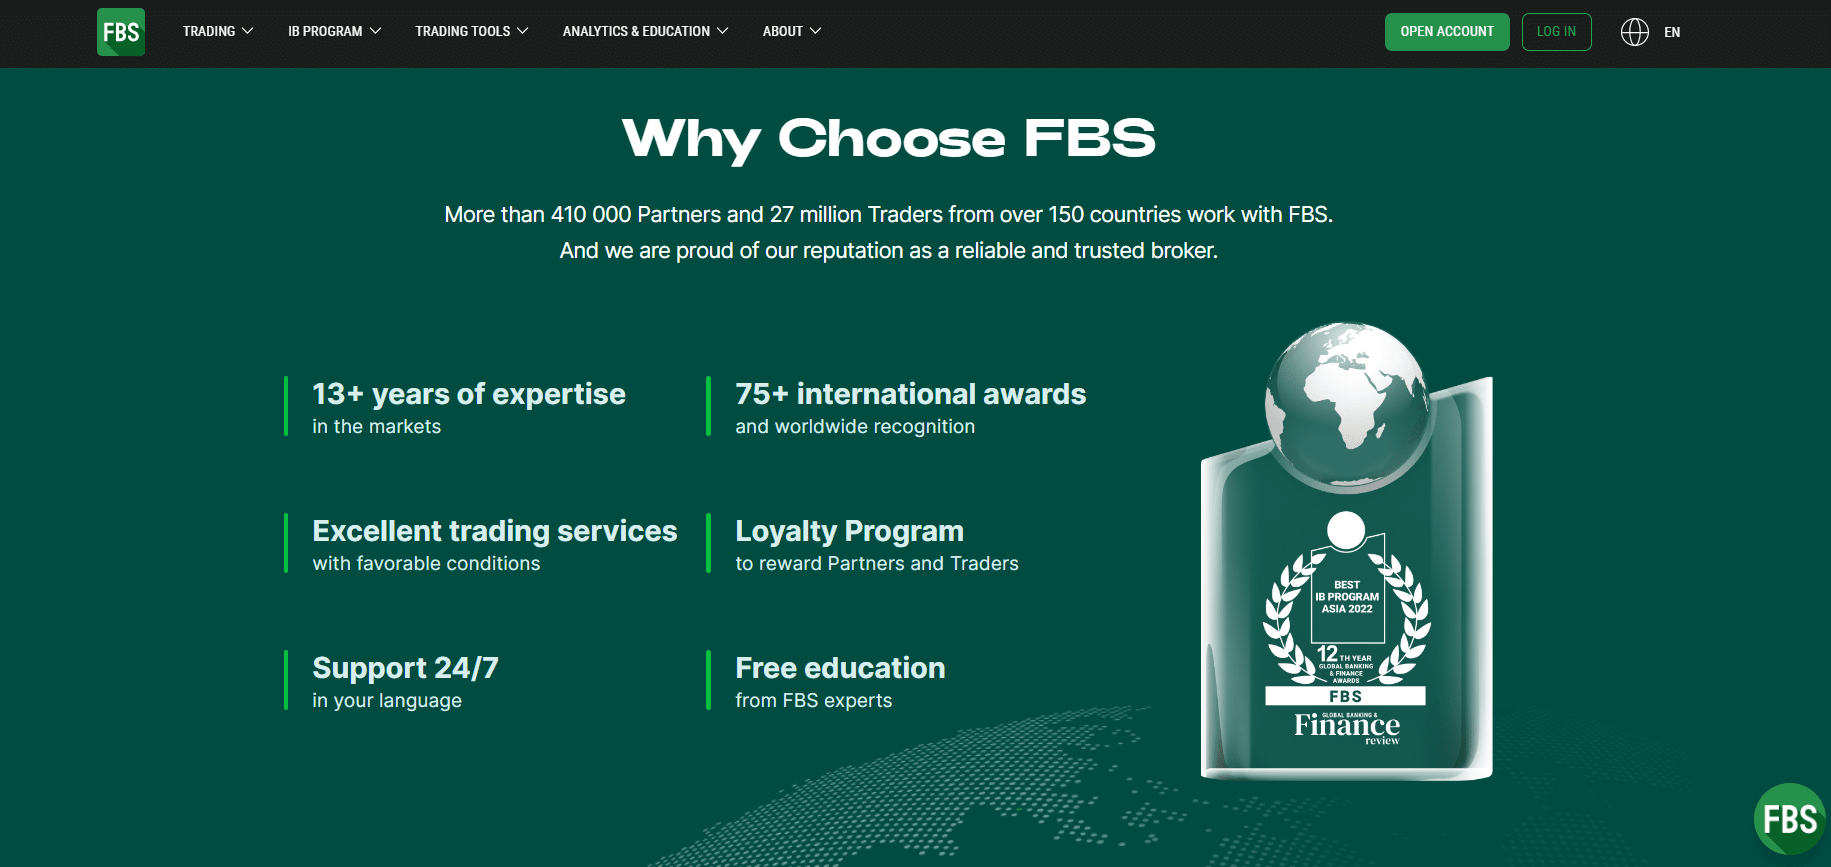 FBS Bonuses and Promotions